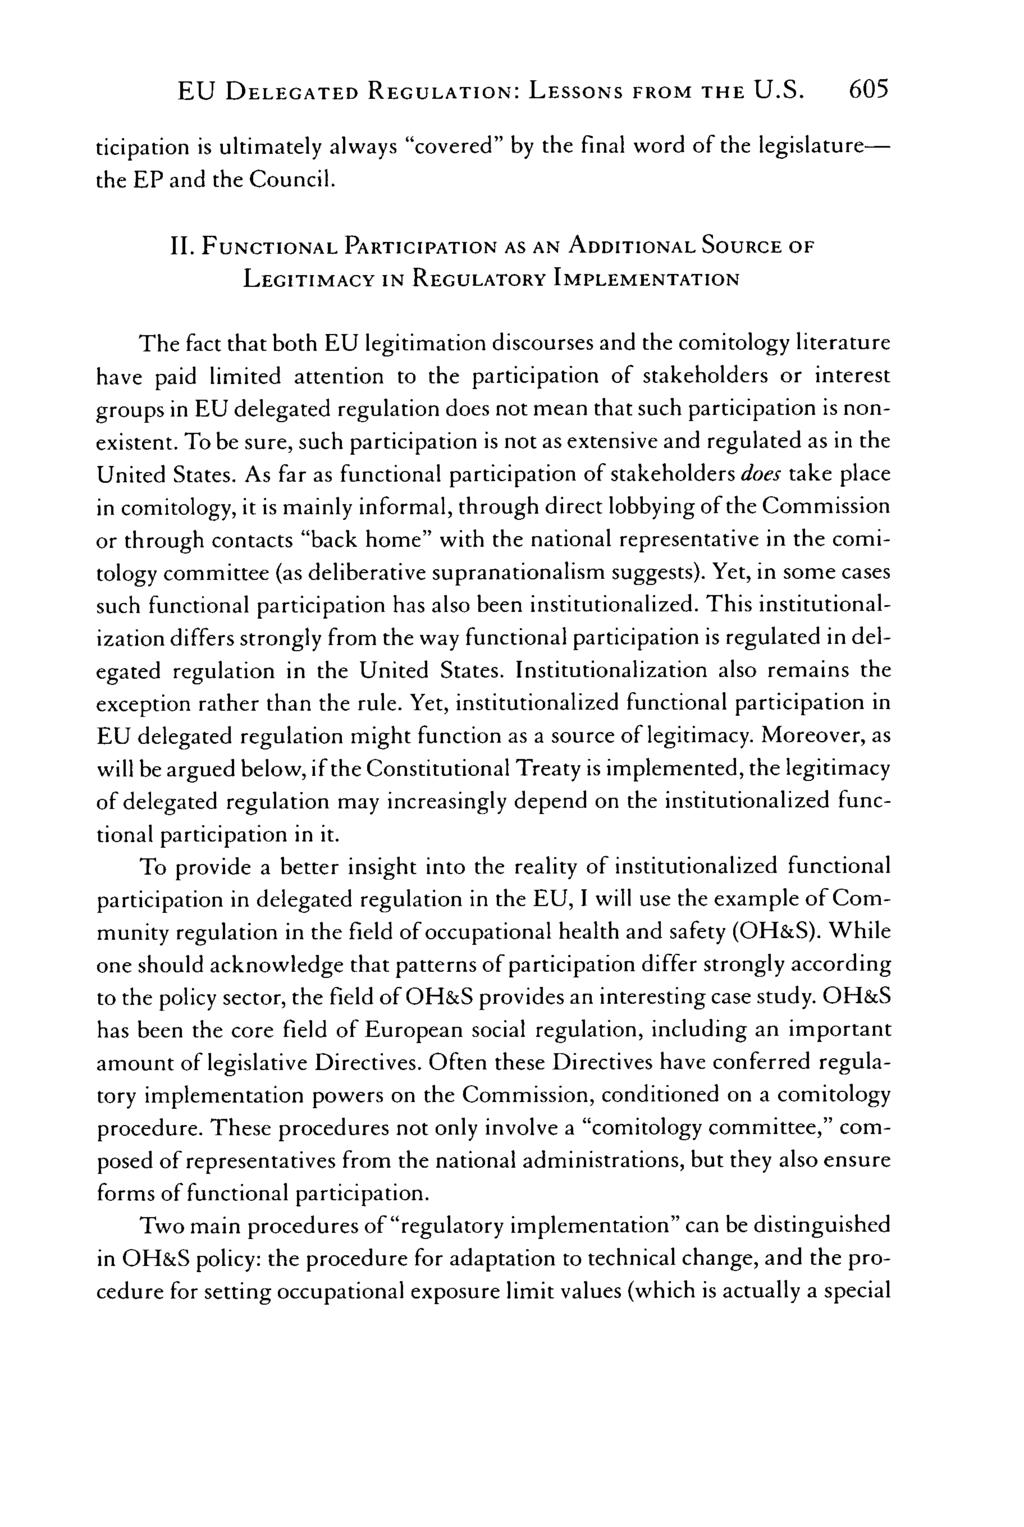 EU DELEGATED REGULATION: LESSONS FROM THE U.S. ticipation is ultimately always "covered" by the final word of the legislaturethe EP and the Council. II.